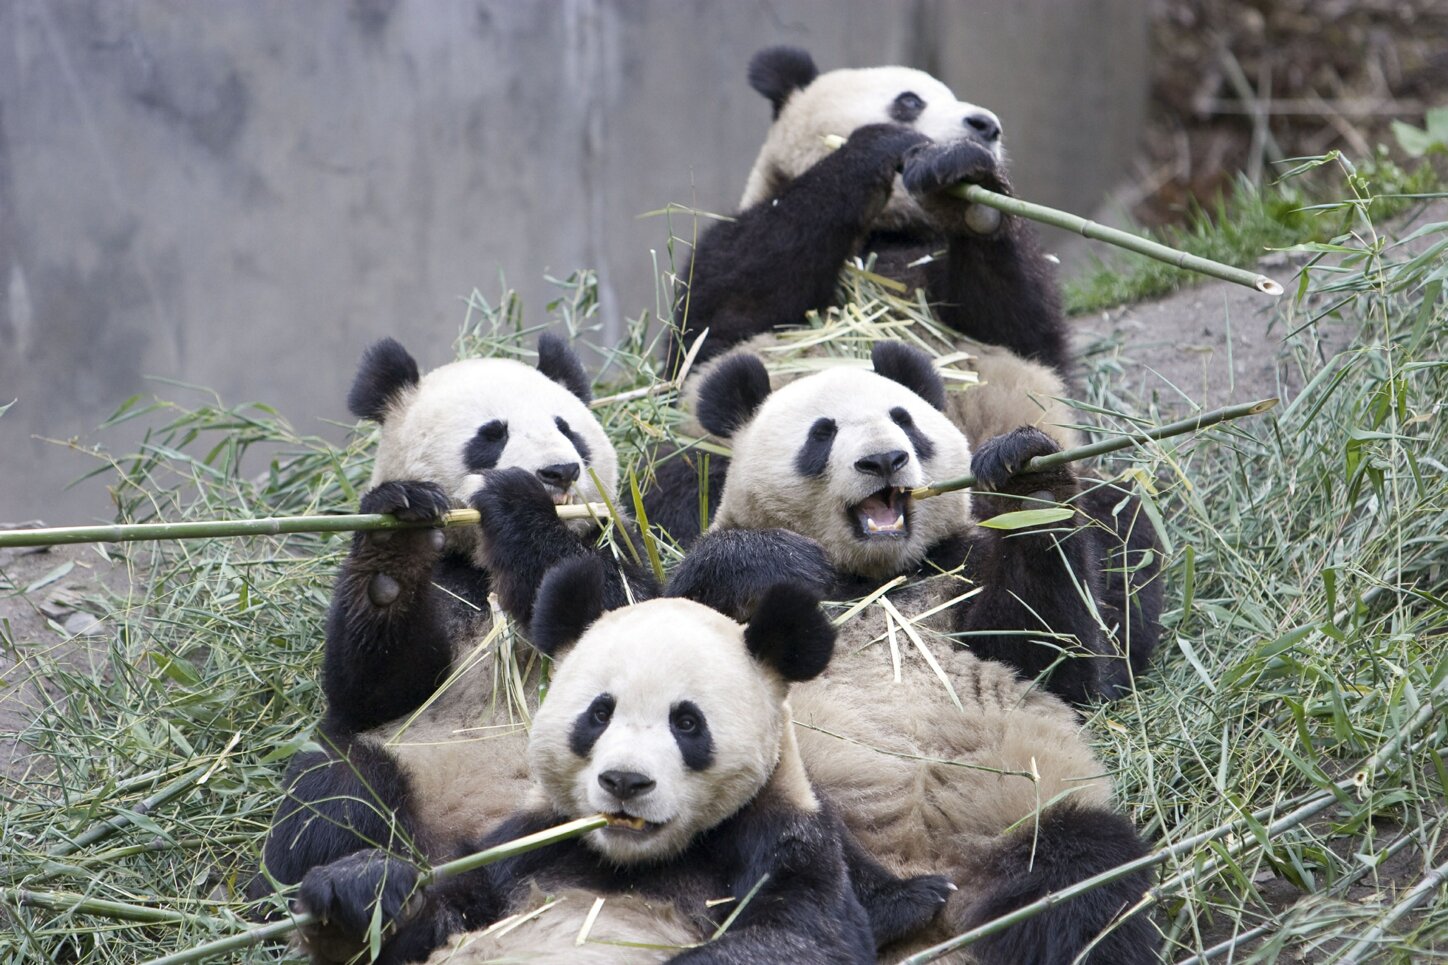 All About Animal Wildlife: Giant Panda Information and Images